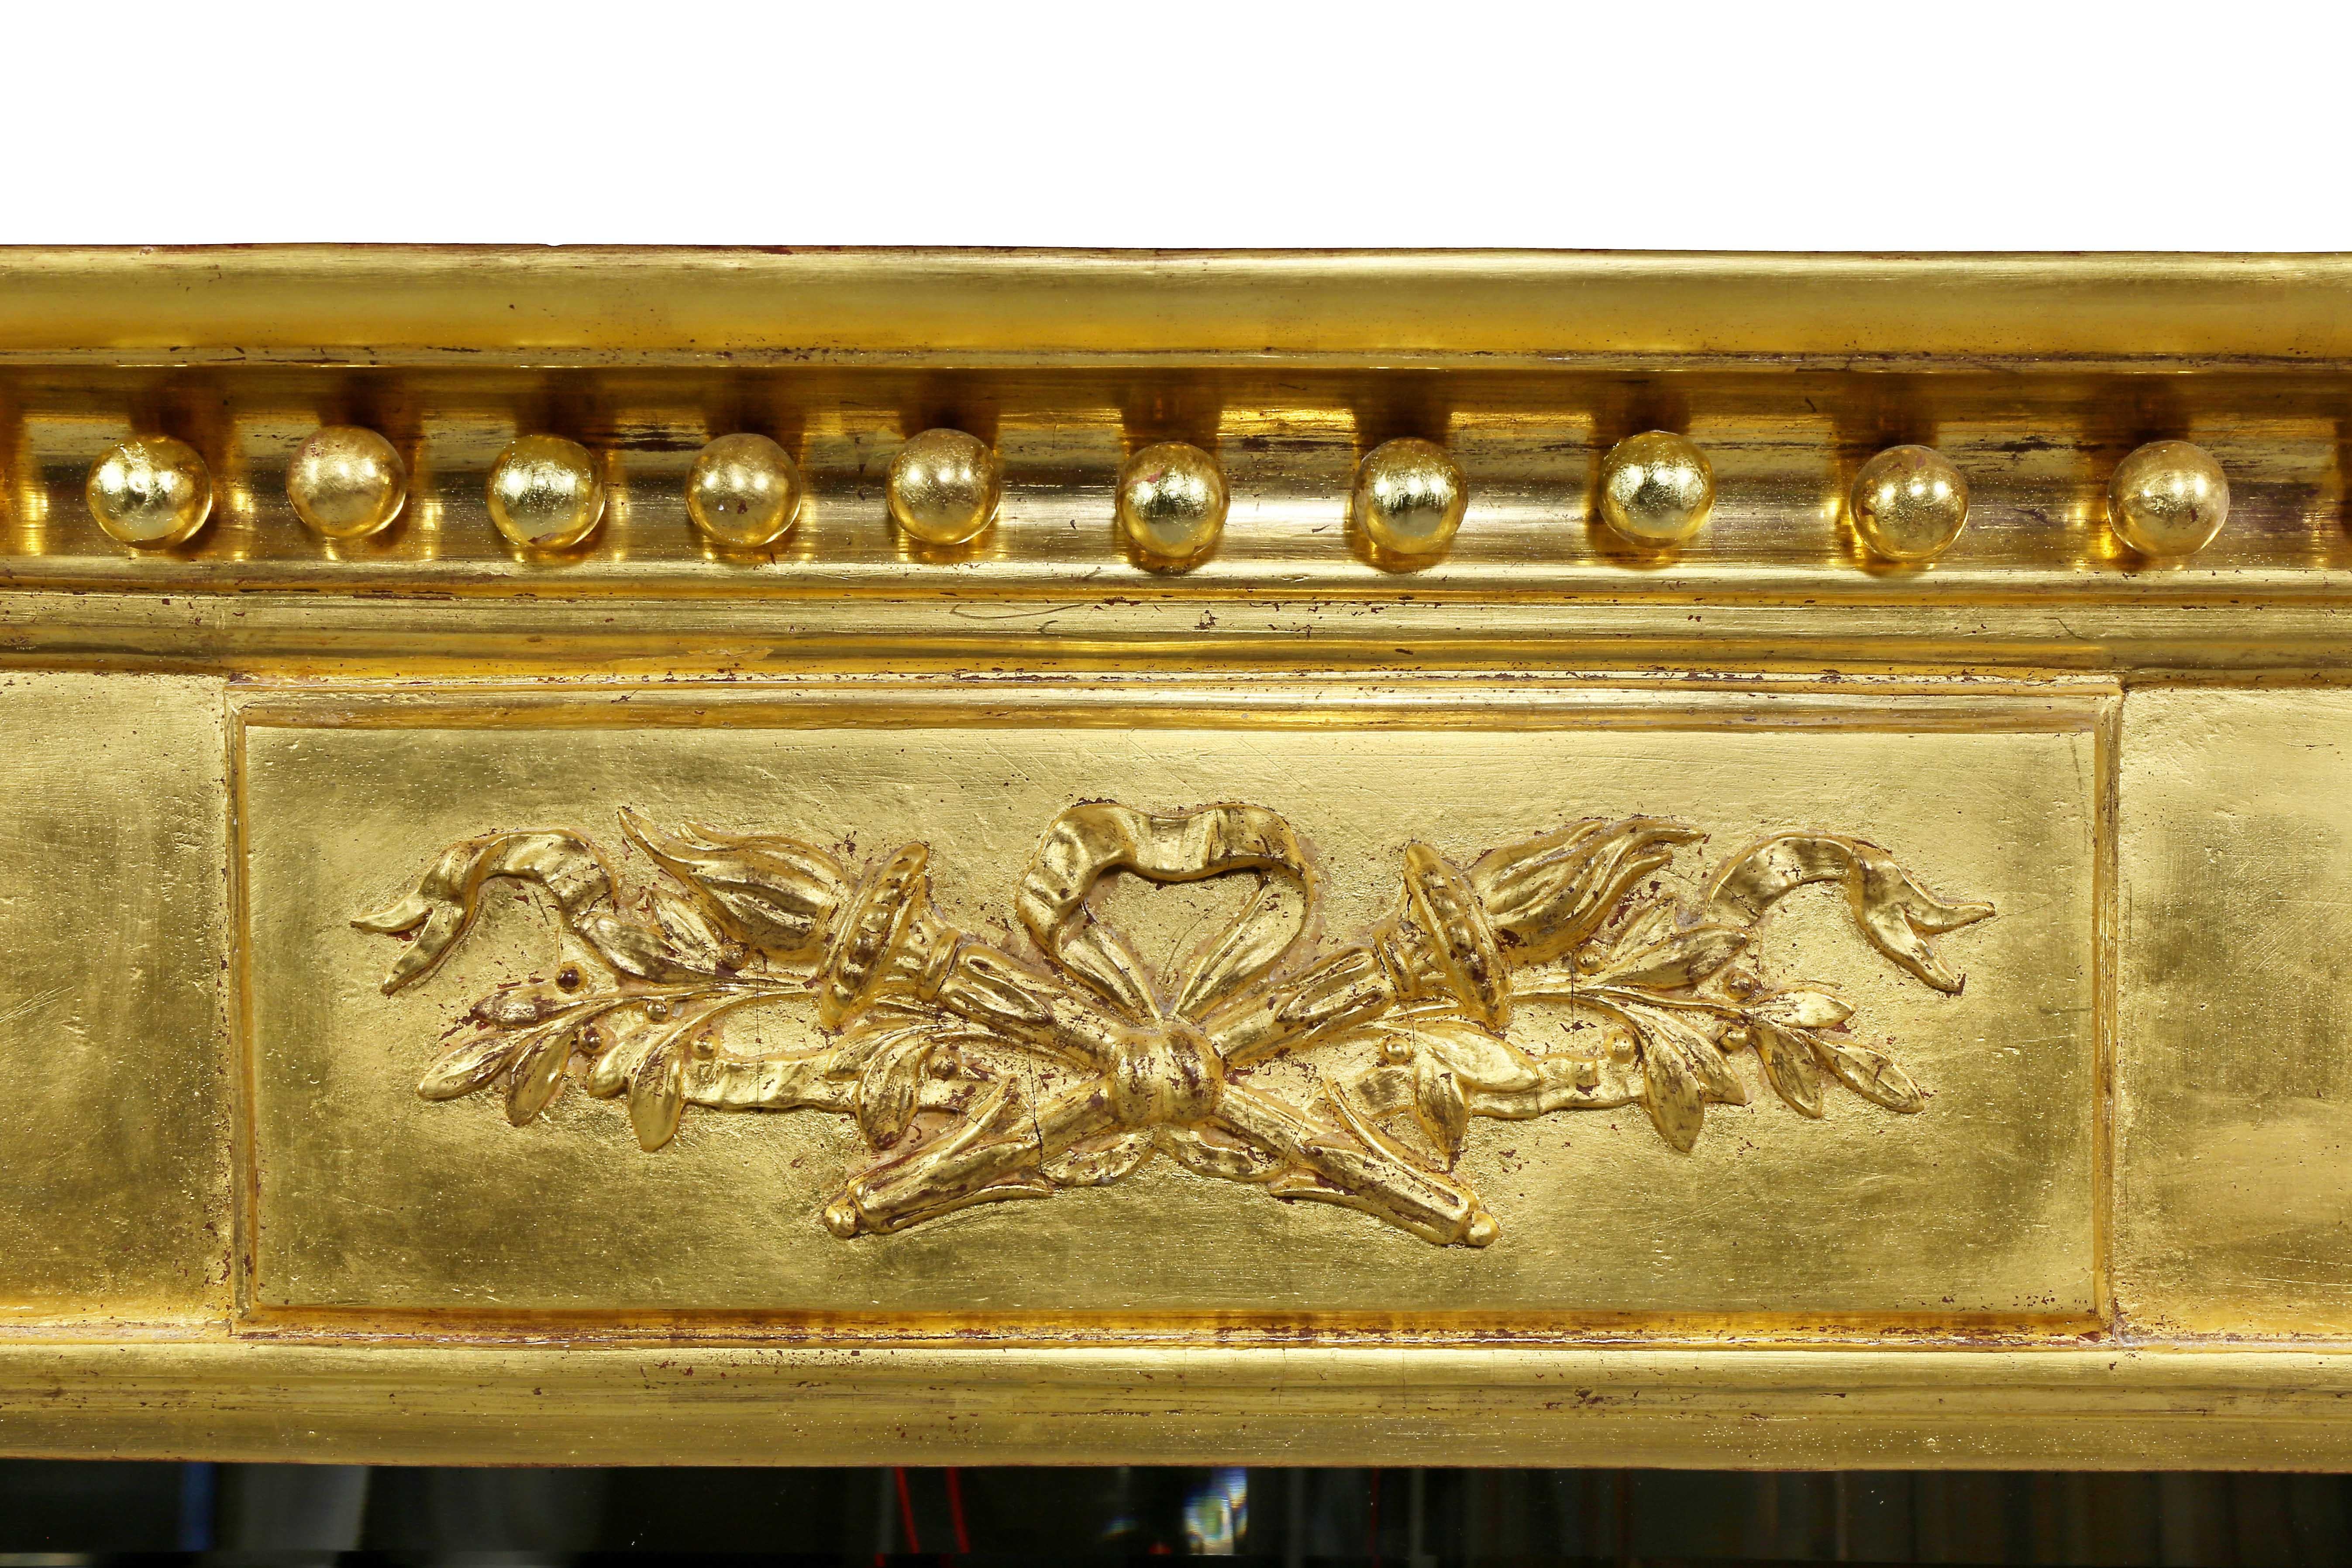 Rectangular with overhanging cornice with gilded sperules over a decorated panel and mirror plate flanked by columns.